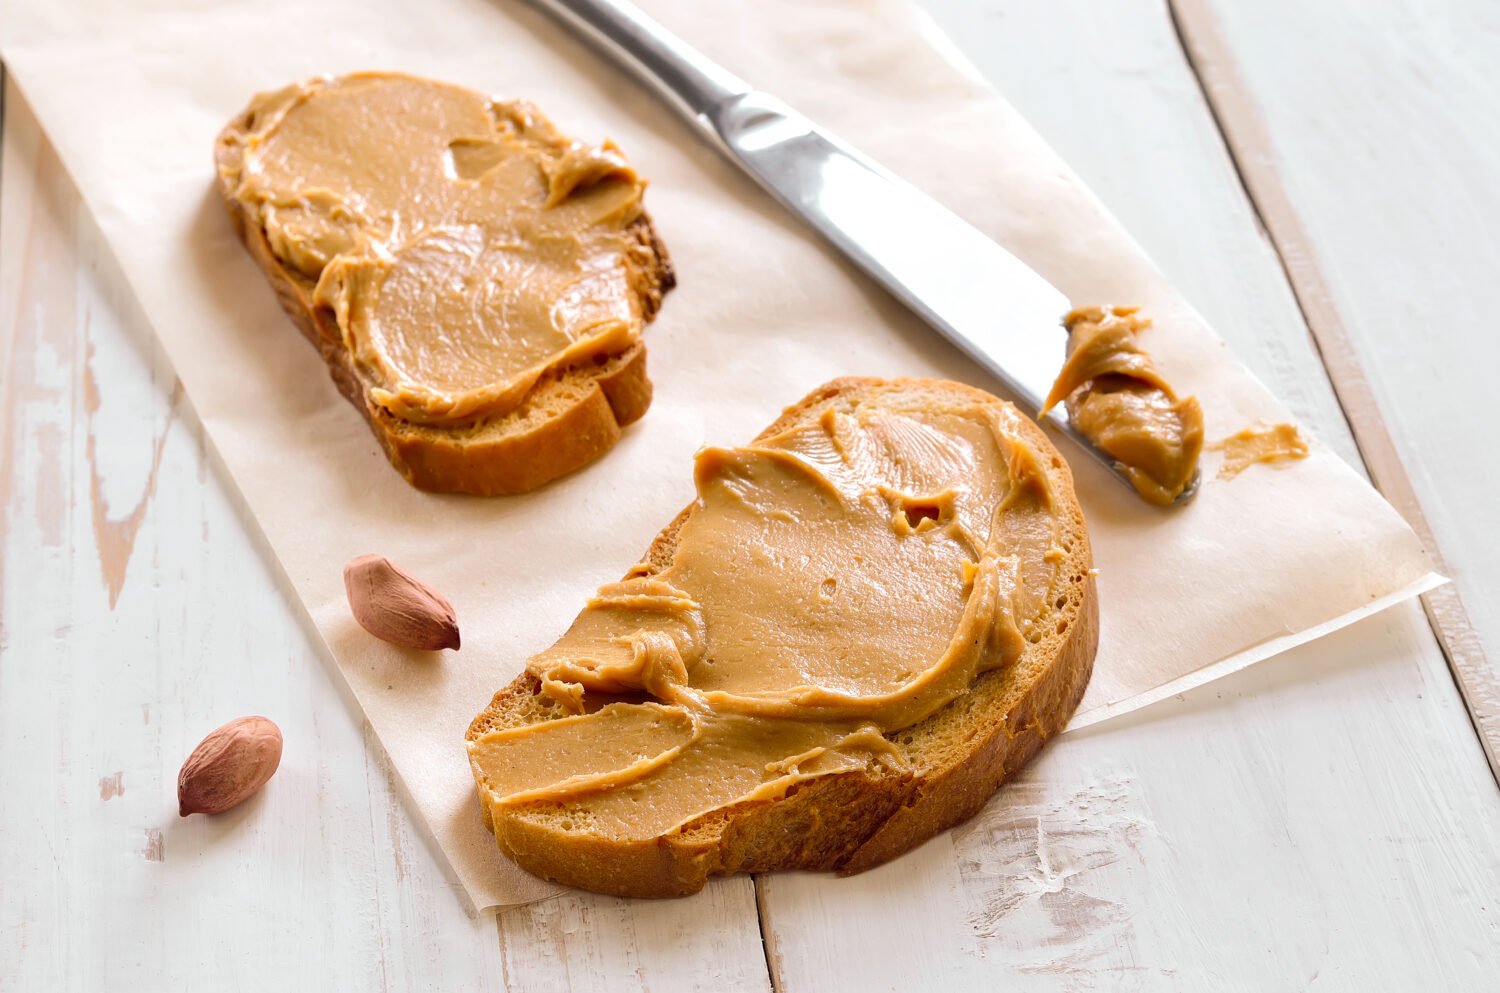 Peanut butter sandwiches or toasts on light wooden background